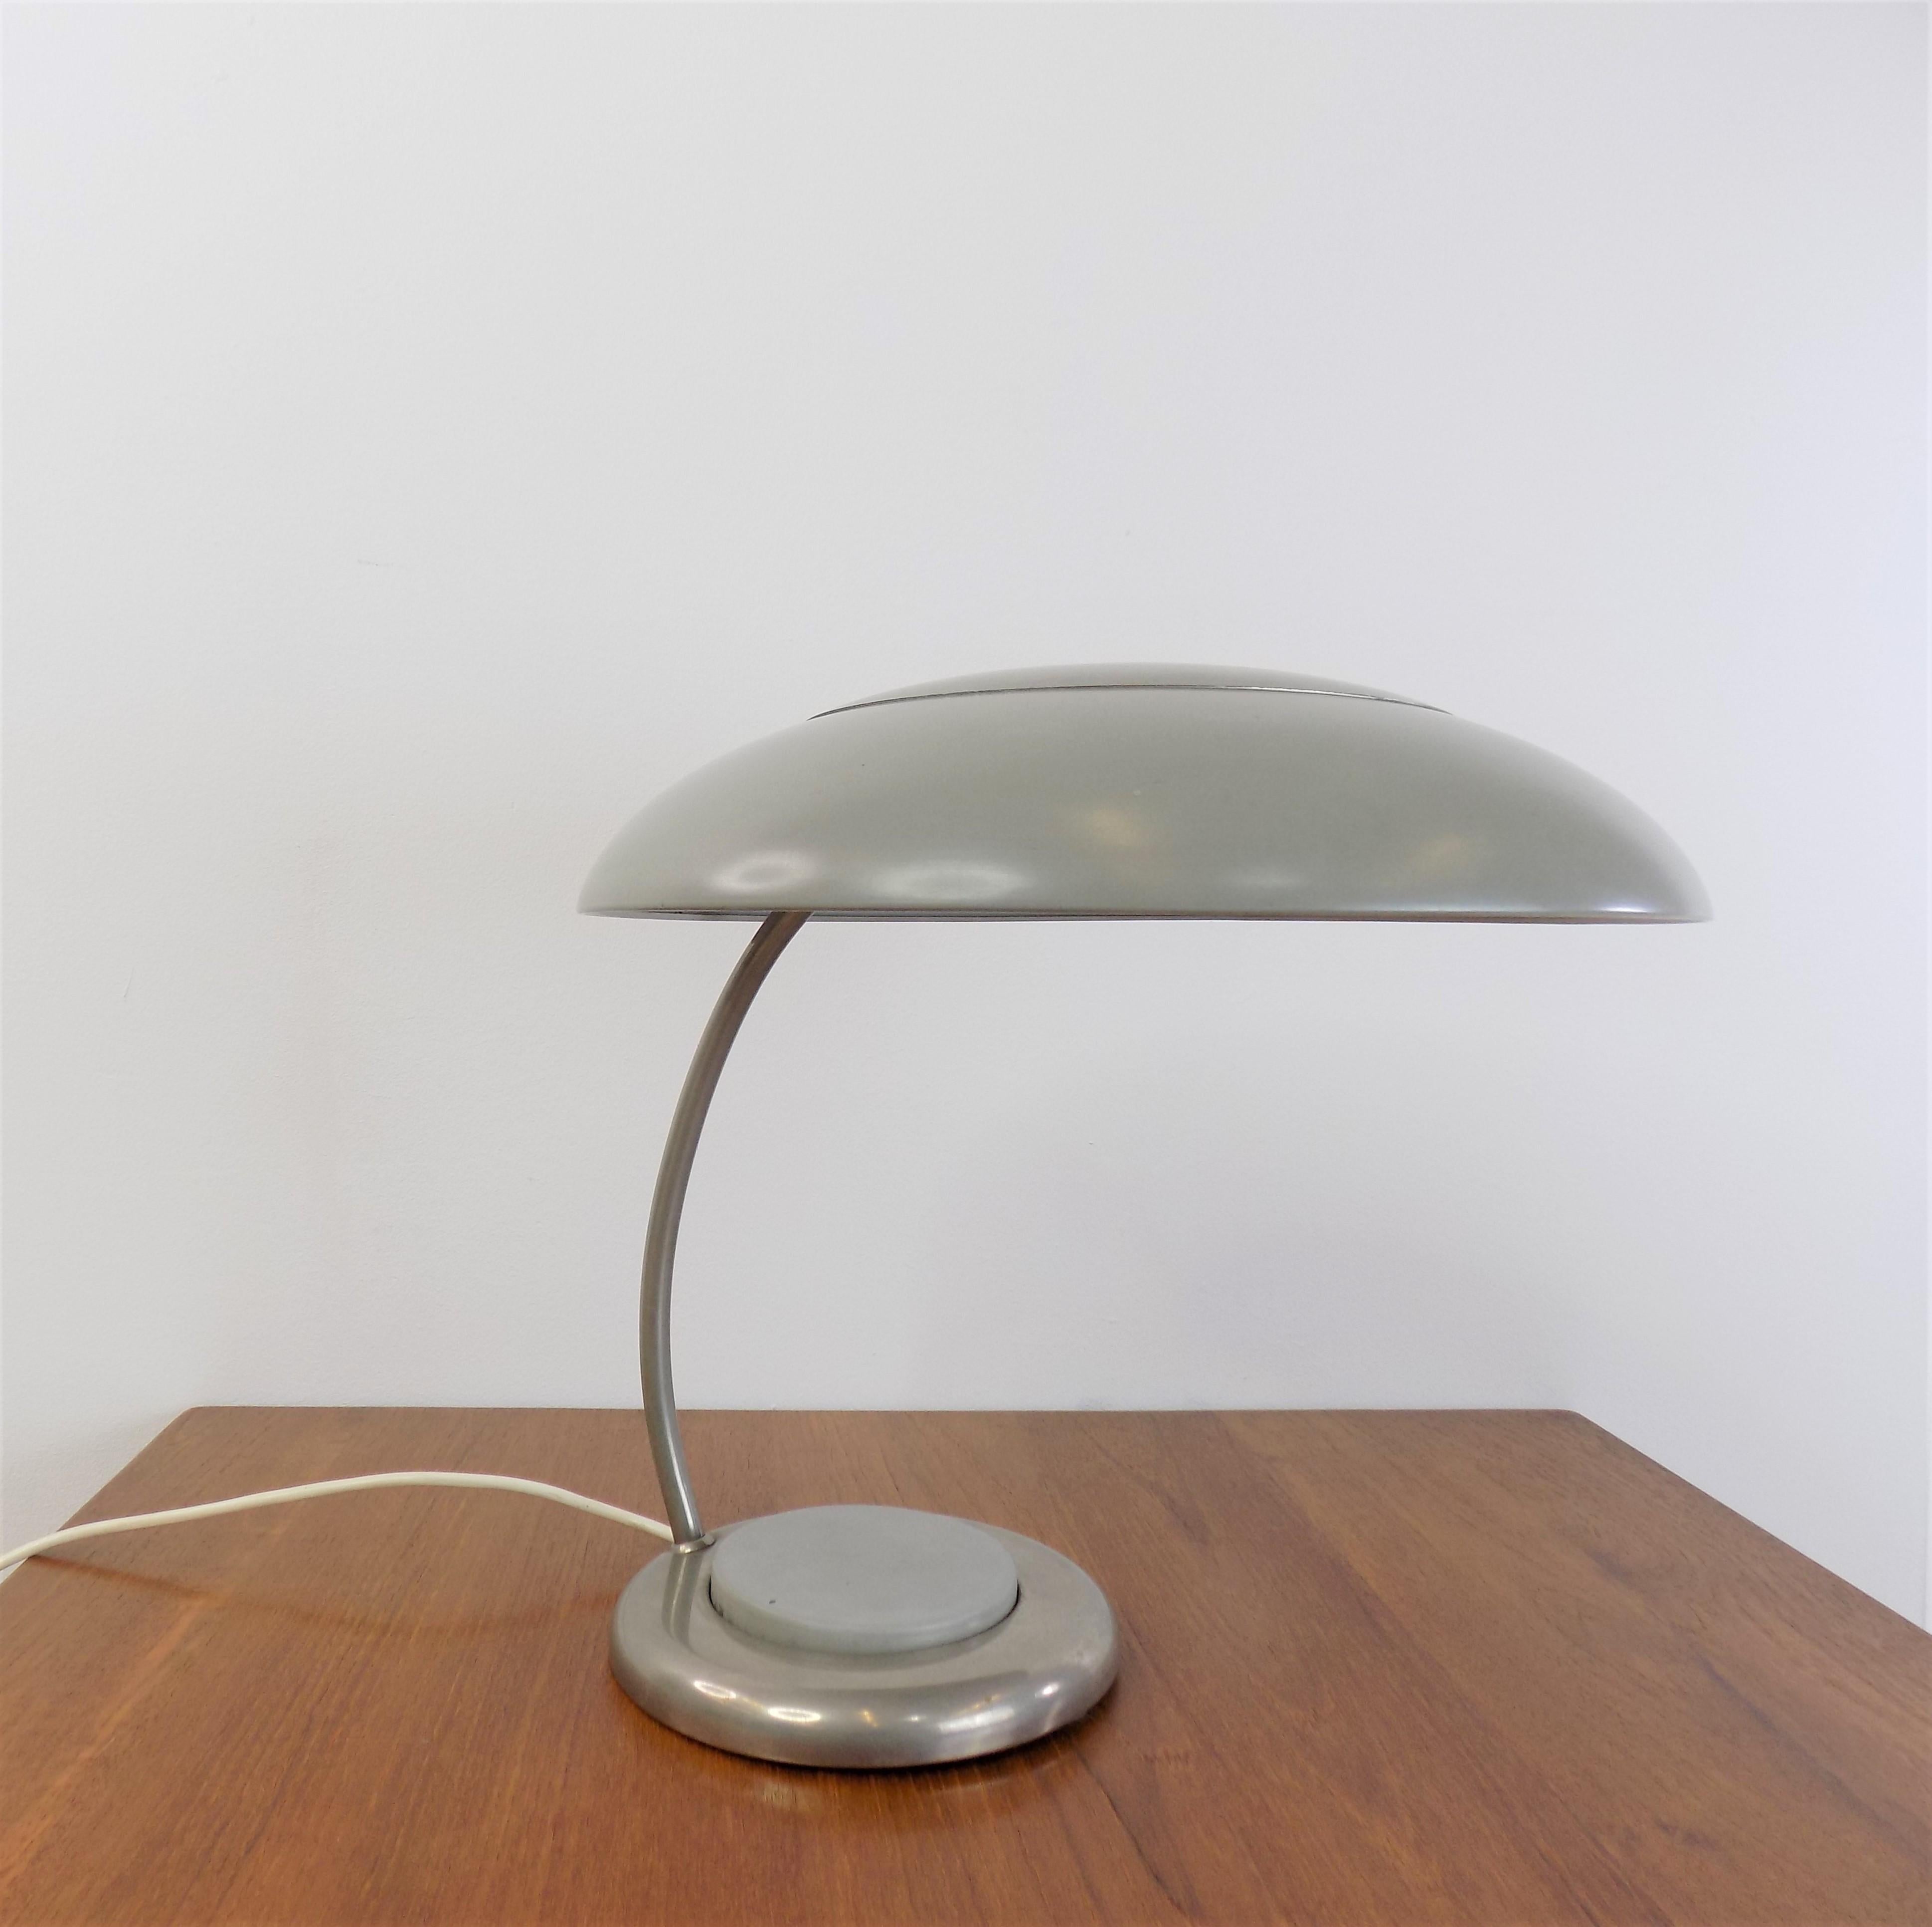 The table lamp is in very good condition with an attractive patina. The dominant lampshade made of greyish metal and a chrome cover shows minimal signs of wear, 
as well as the lamp base which impresses with the extraordinarily large round